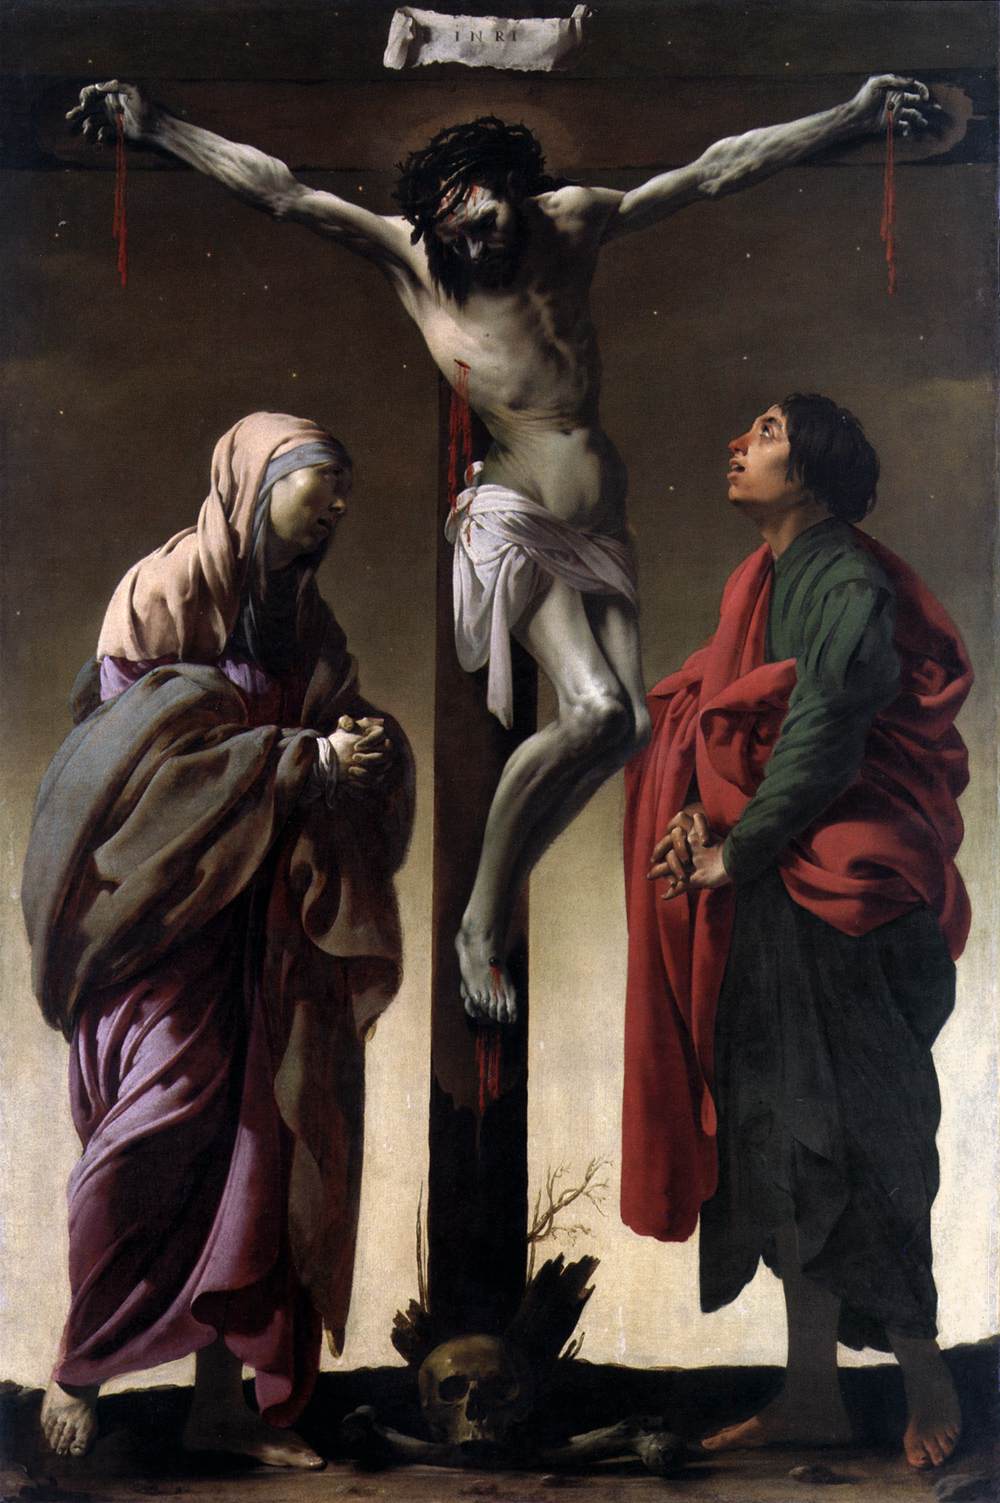 The Crucifixion with the Virgin and Saint John